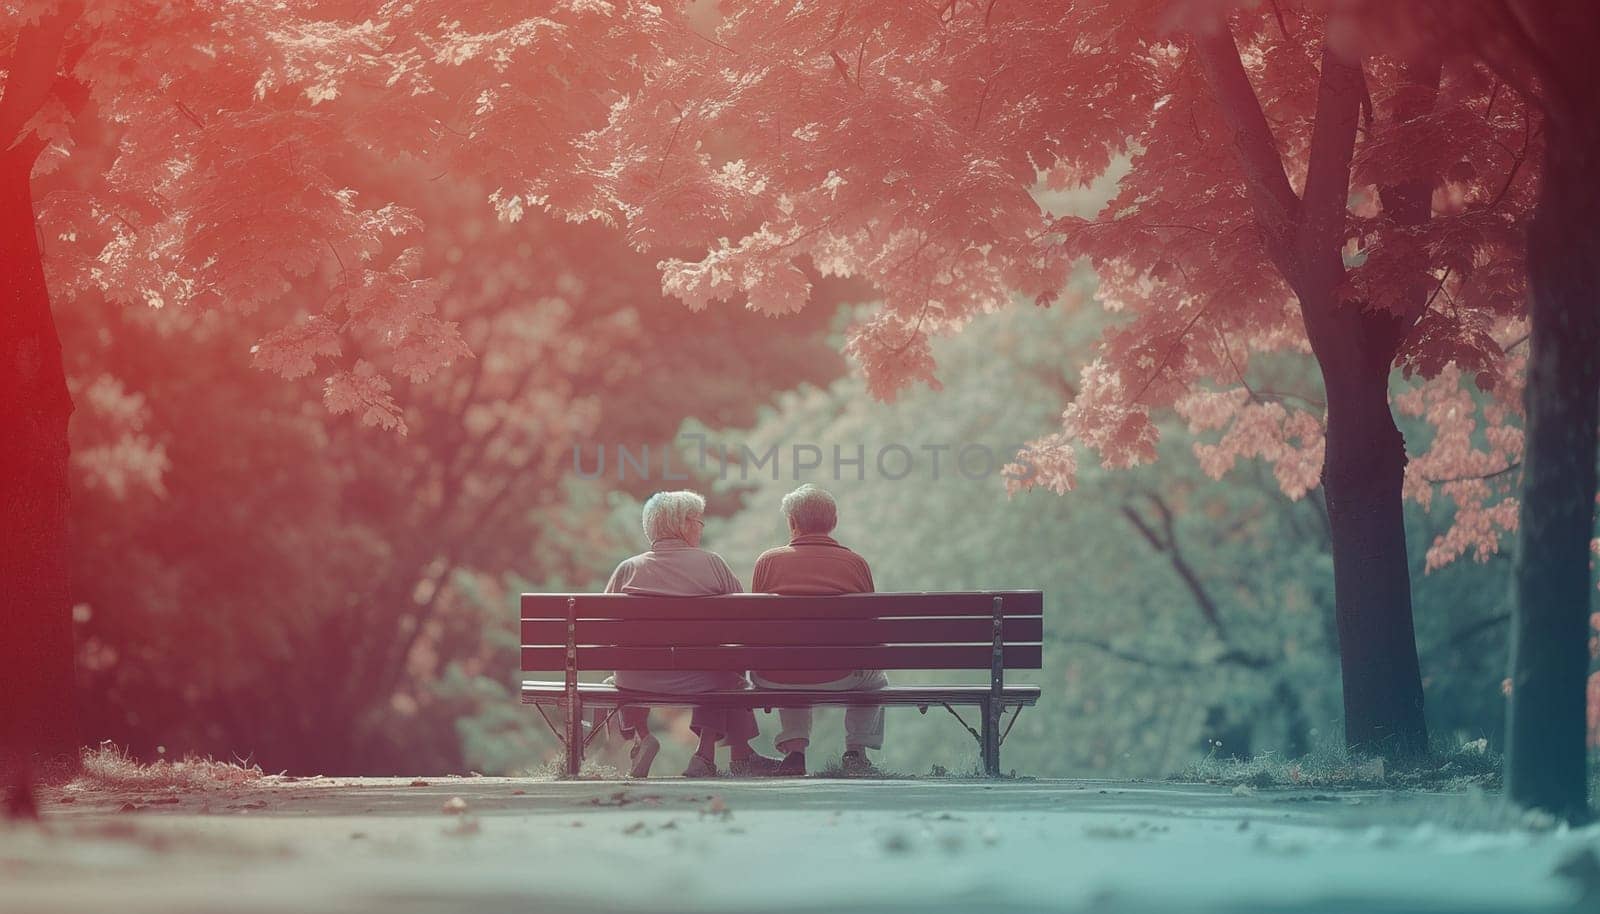 An elderly couple is sitting in the park. High quality photo